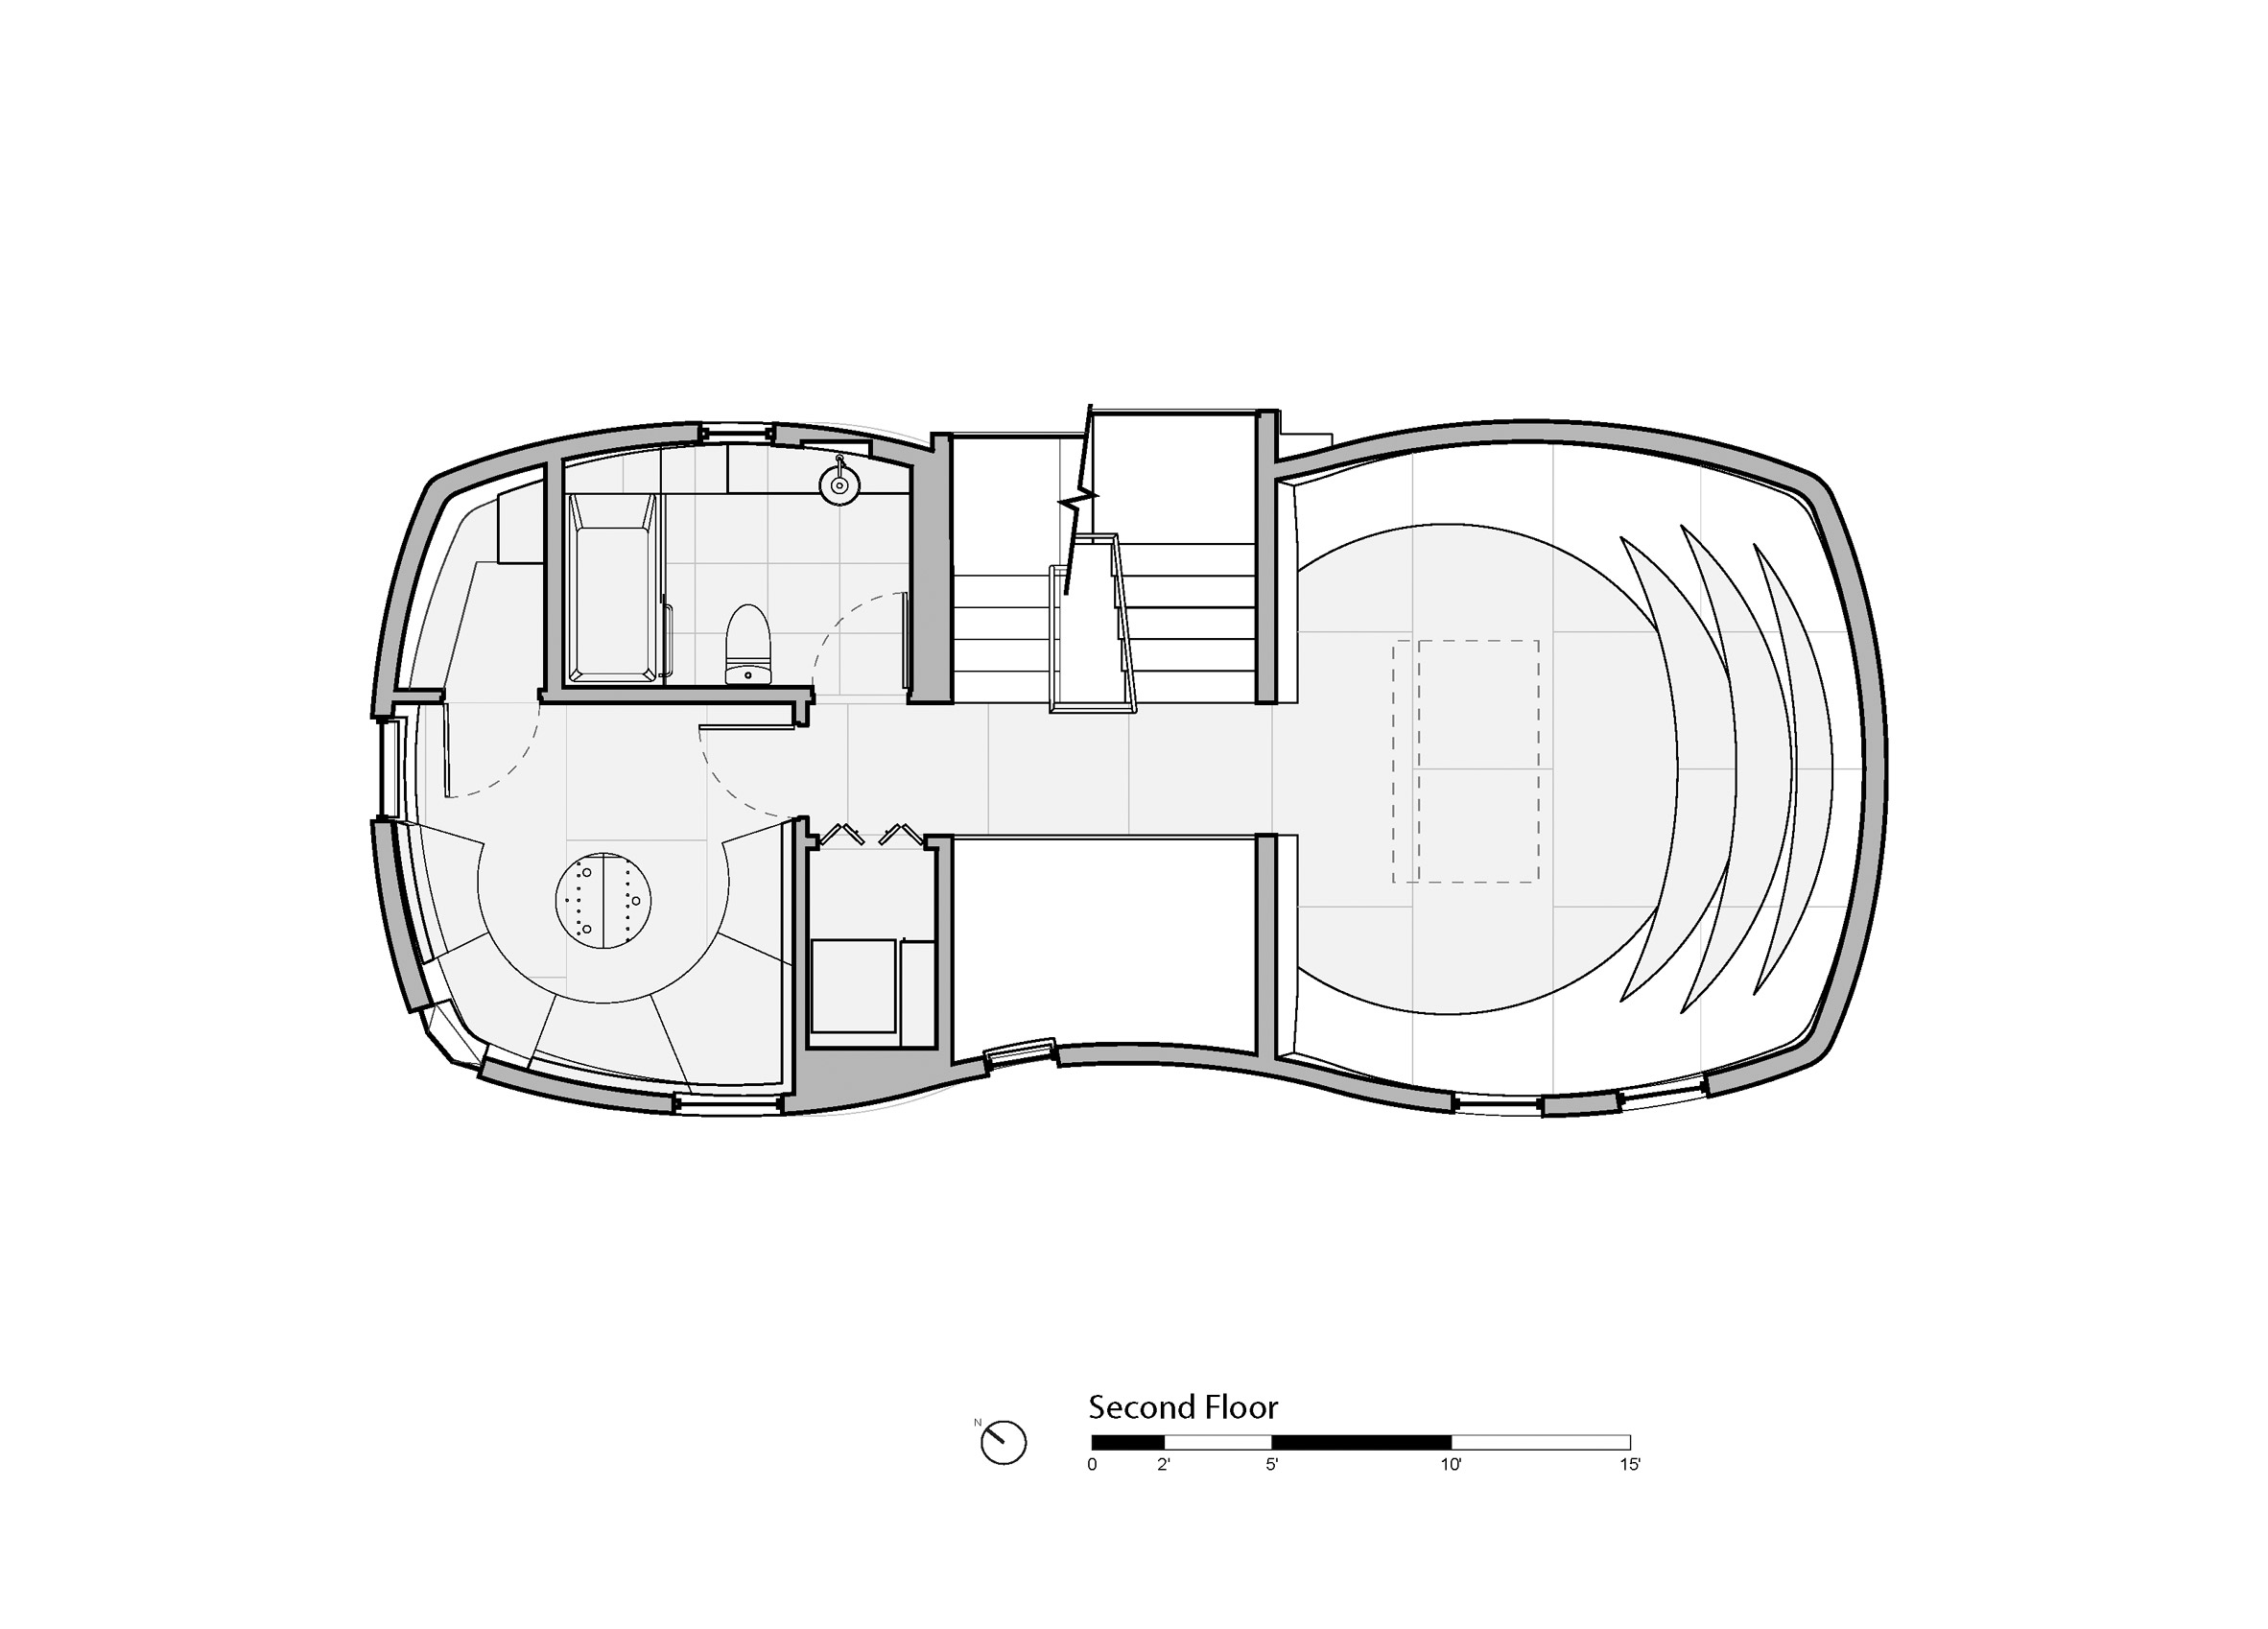 The first floor plan